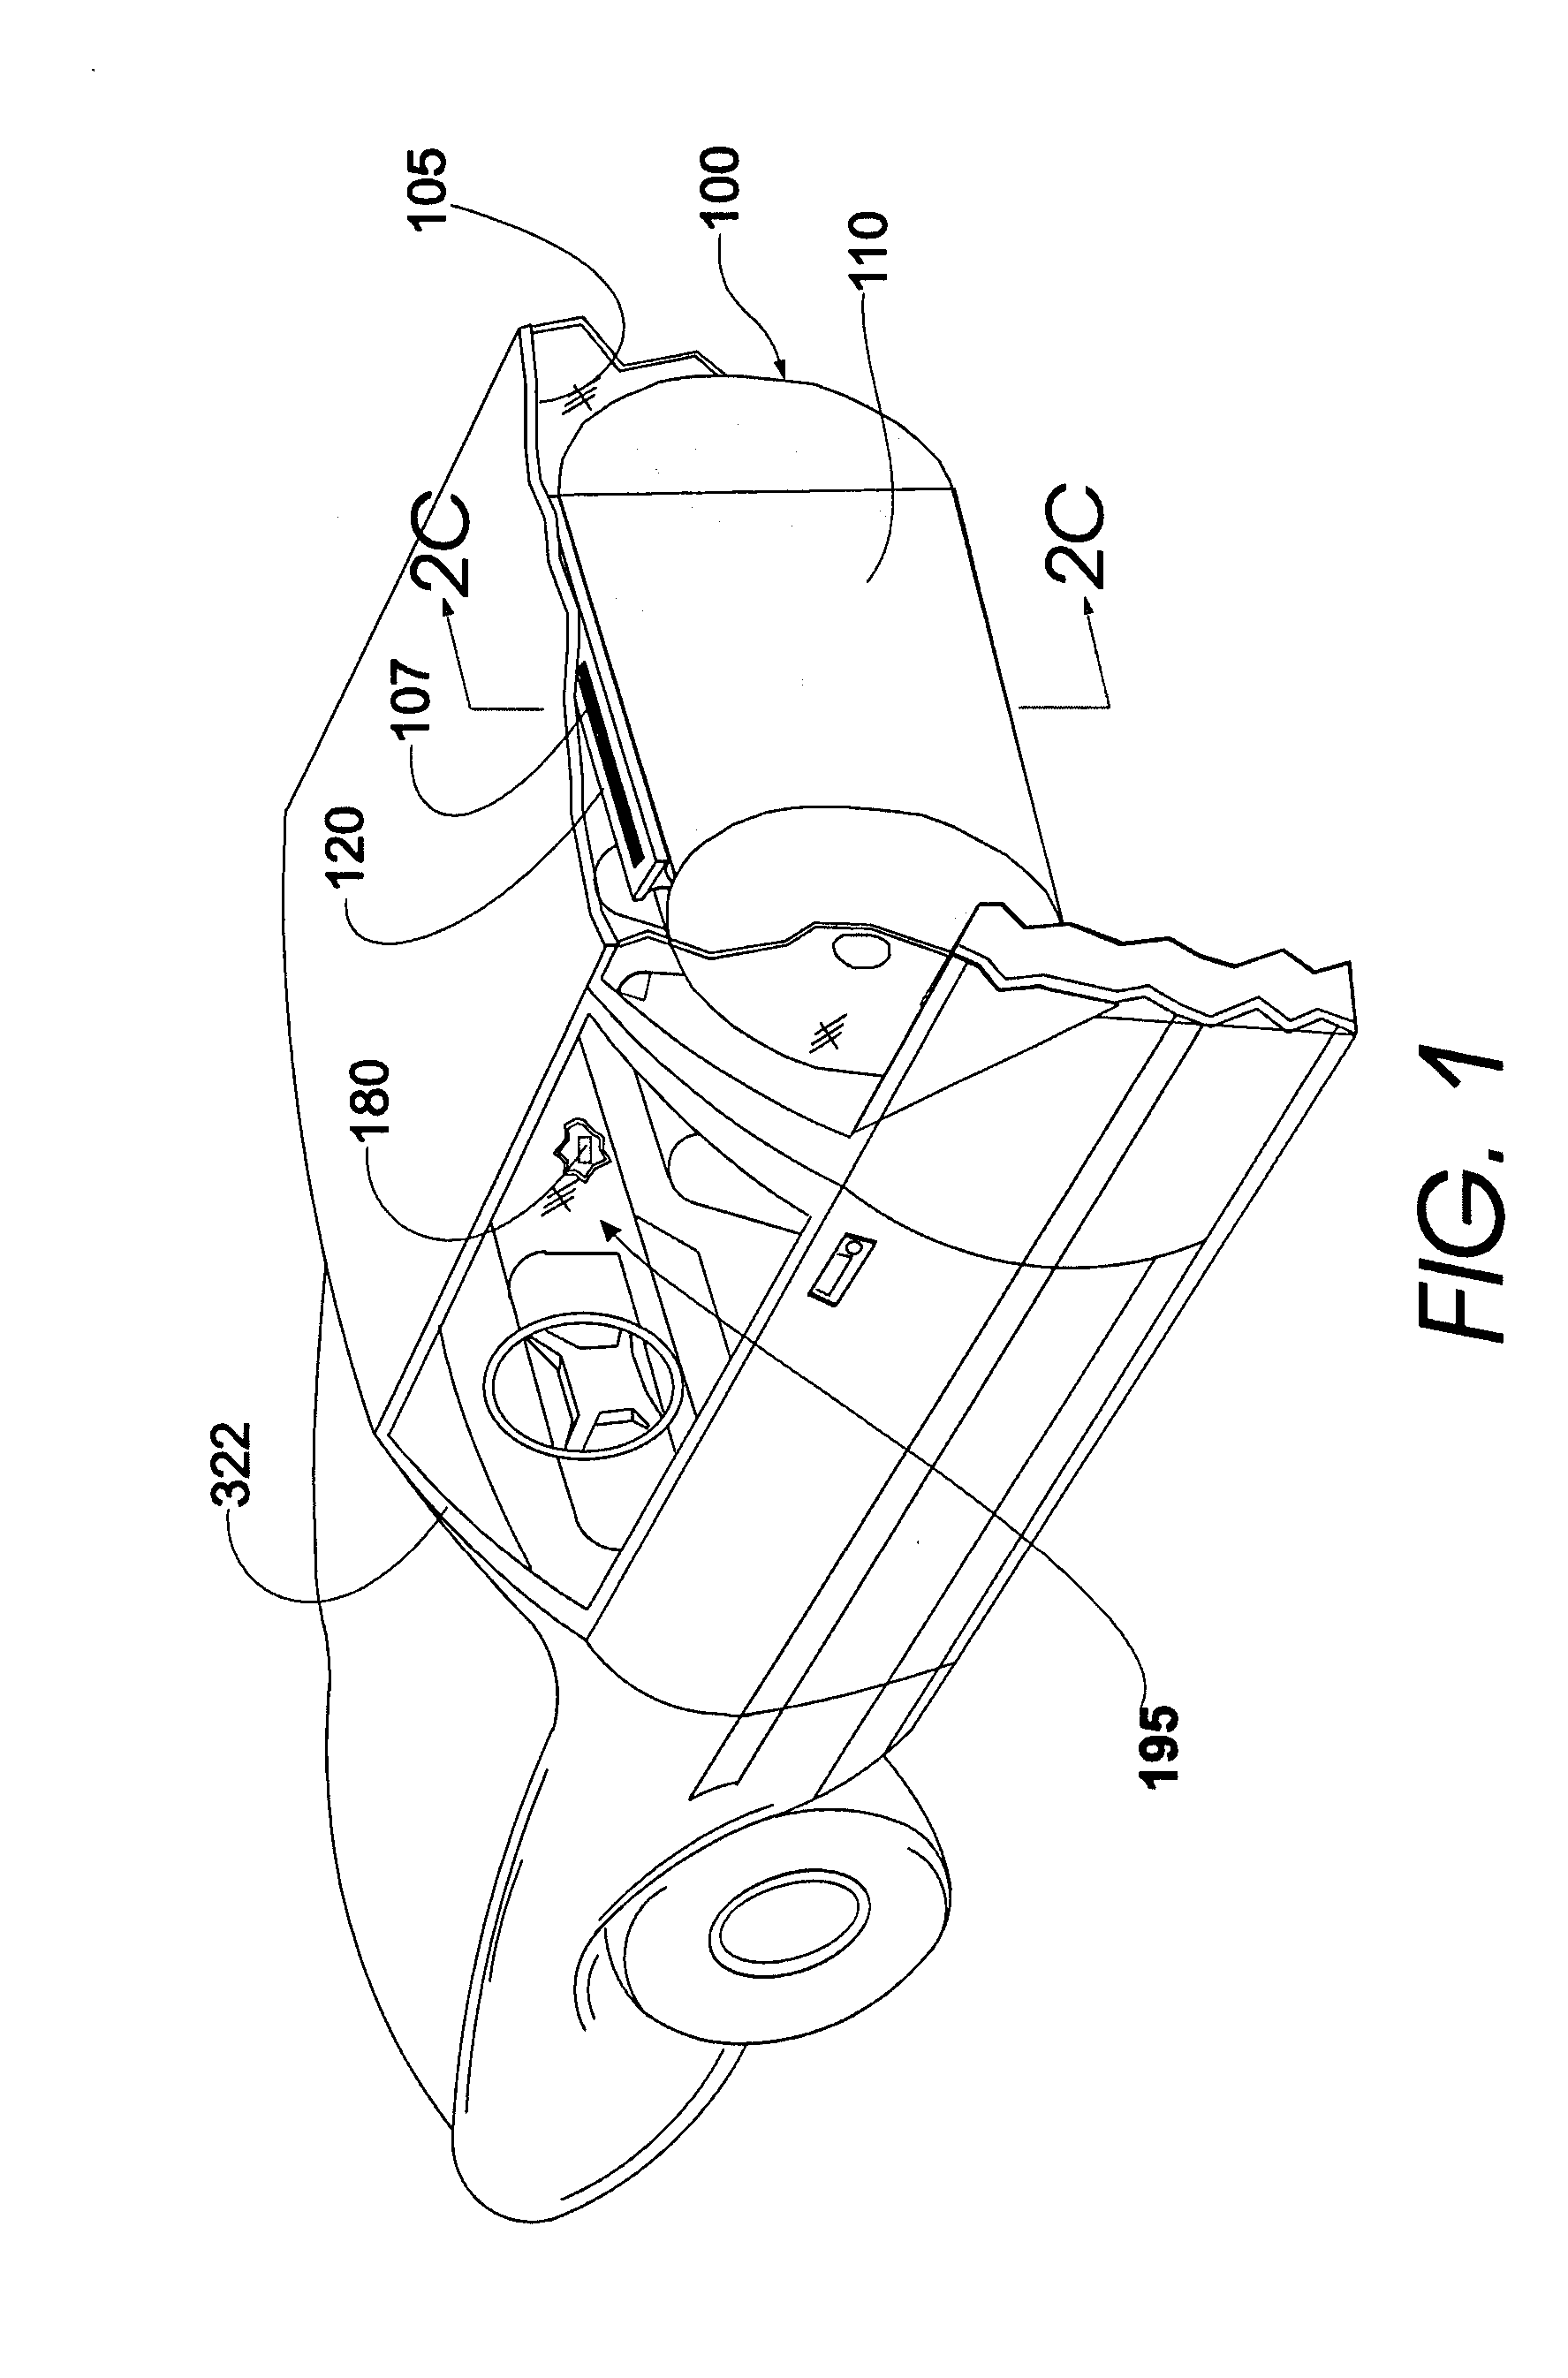 Electronics-Containing Airbag Module